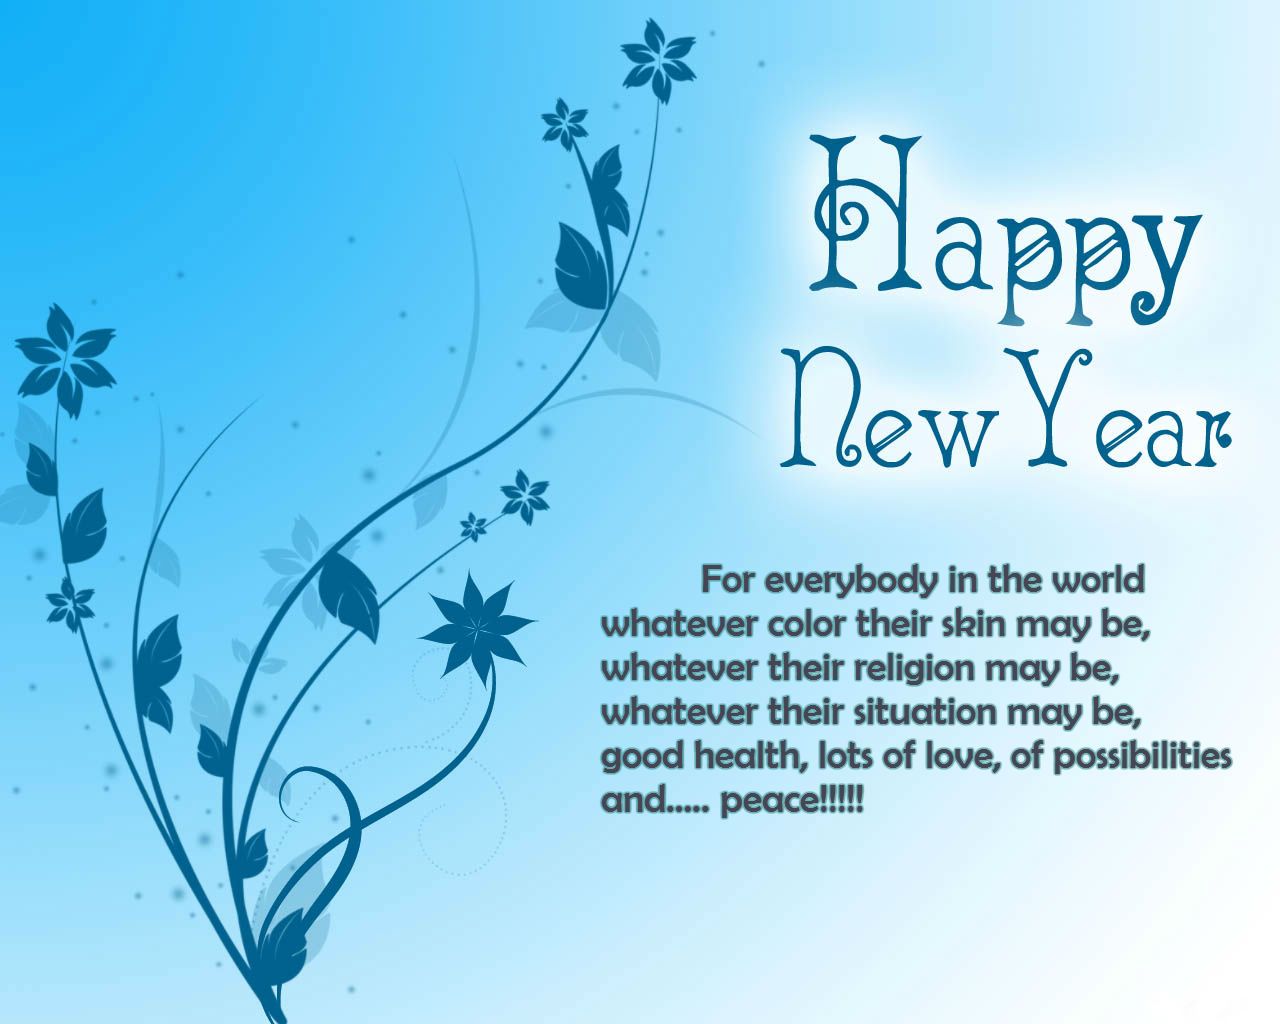 Happy New Year. Happy new year wallpaper, New years eve quotes, Happy new year quotes